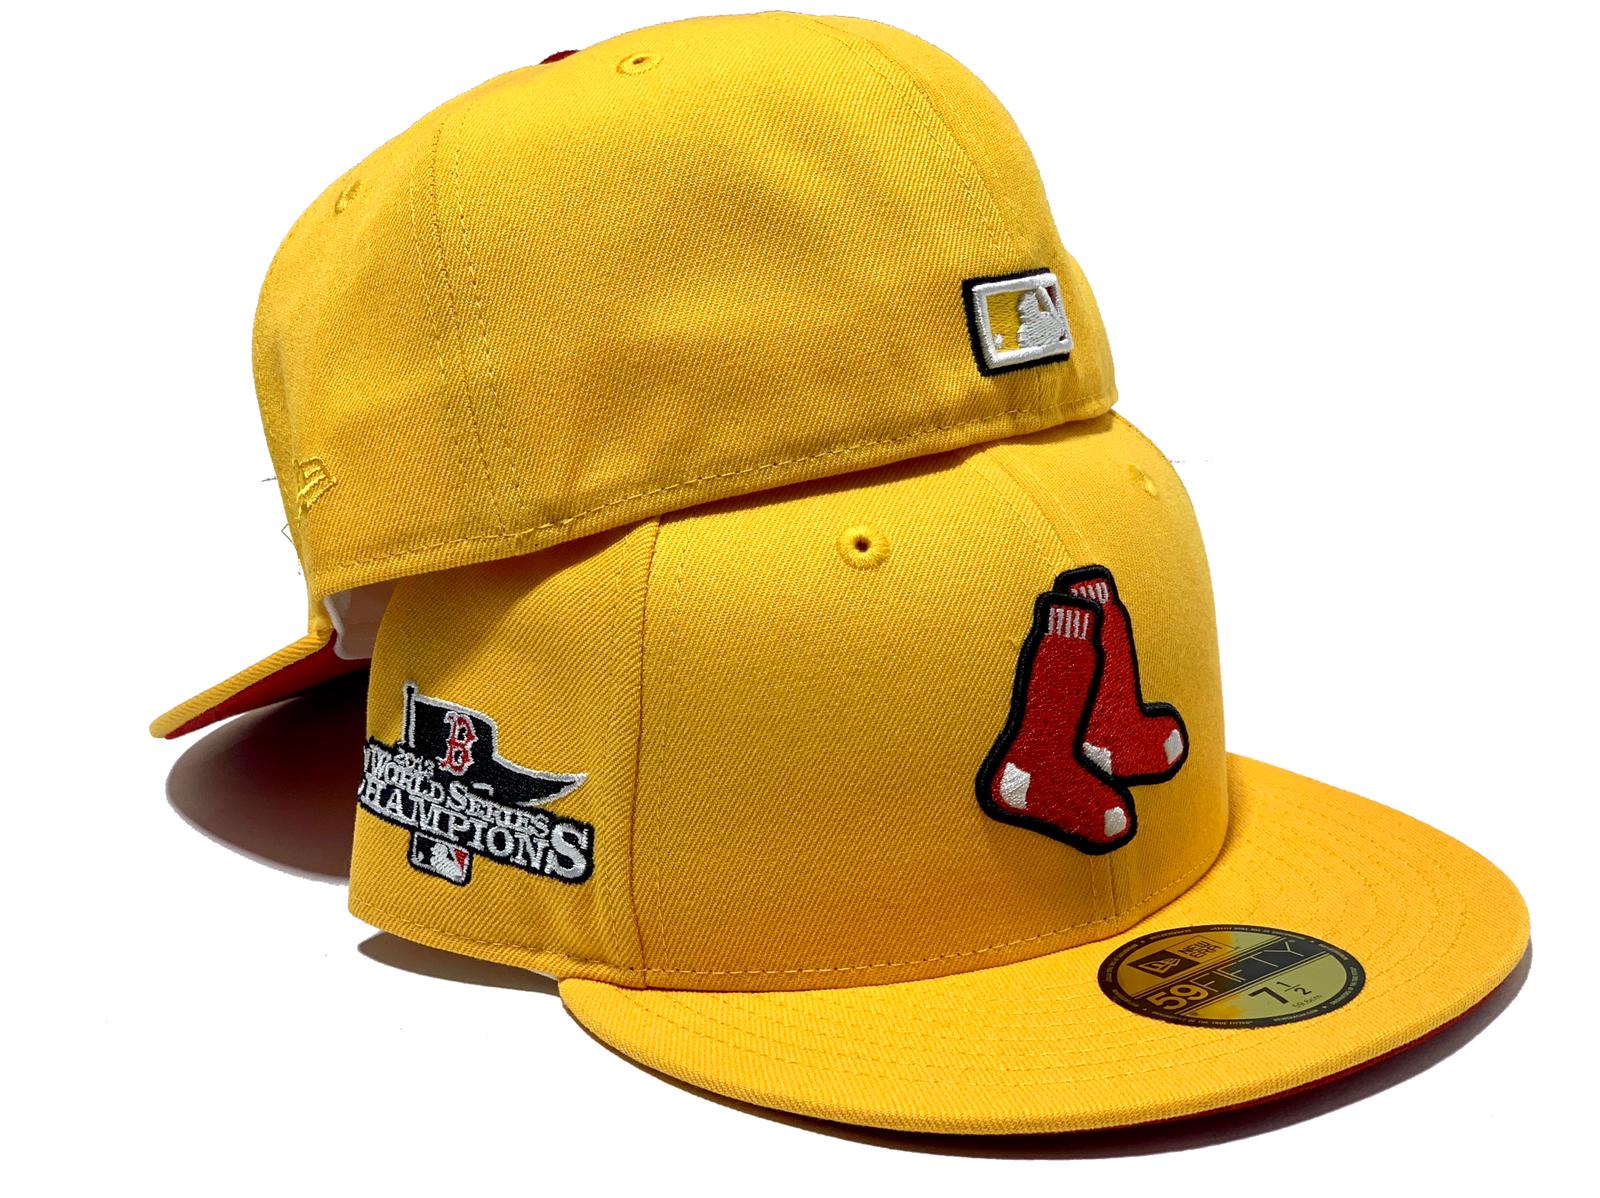 BOSTON RED SOX 2013 WORLD SERIES CHAMPIONSHIP TAXI YELLOW RED BRIM NEW